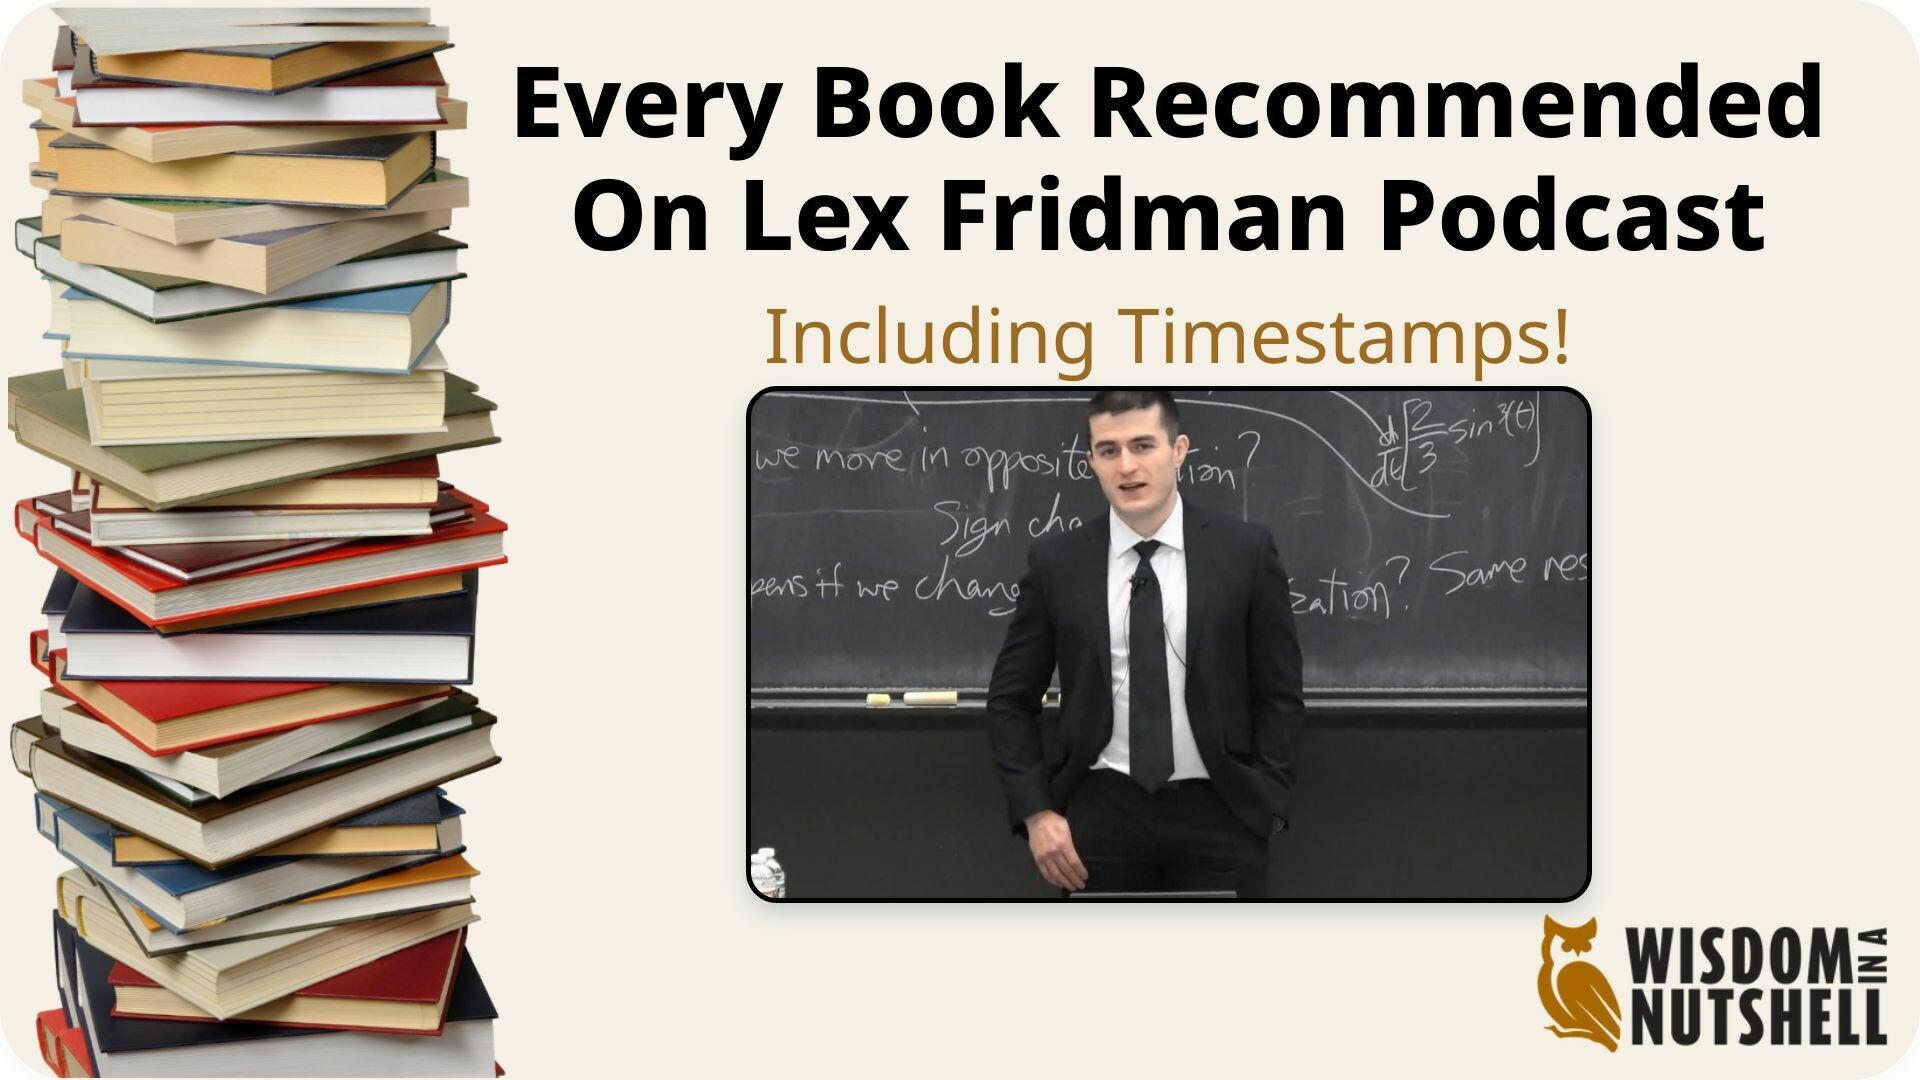 Every Book Recommended on the Lex Fridman Podcast